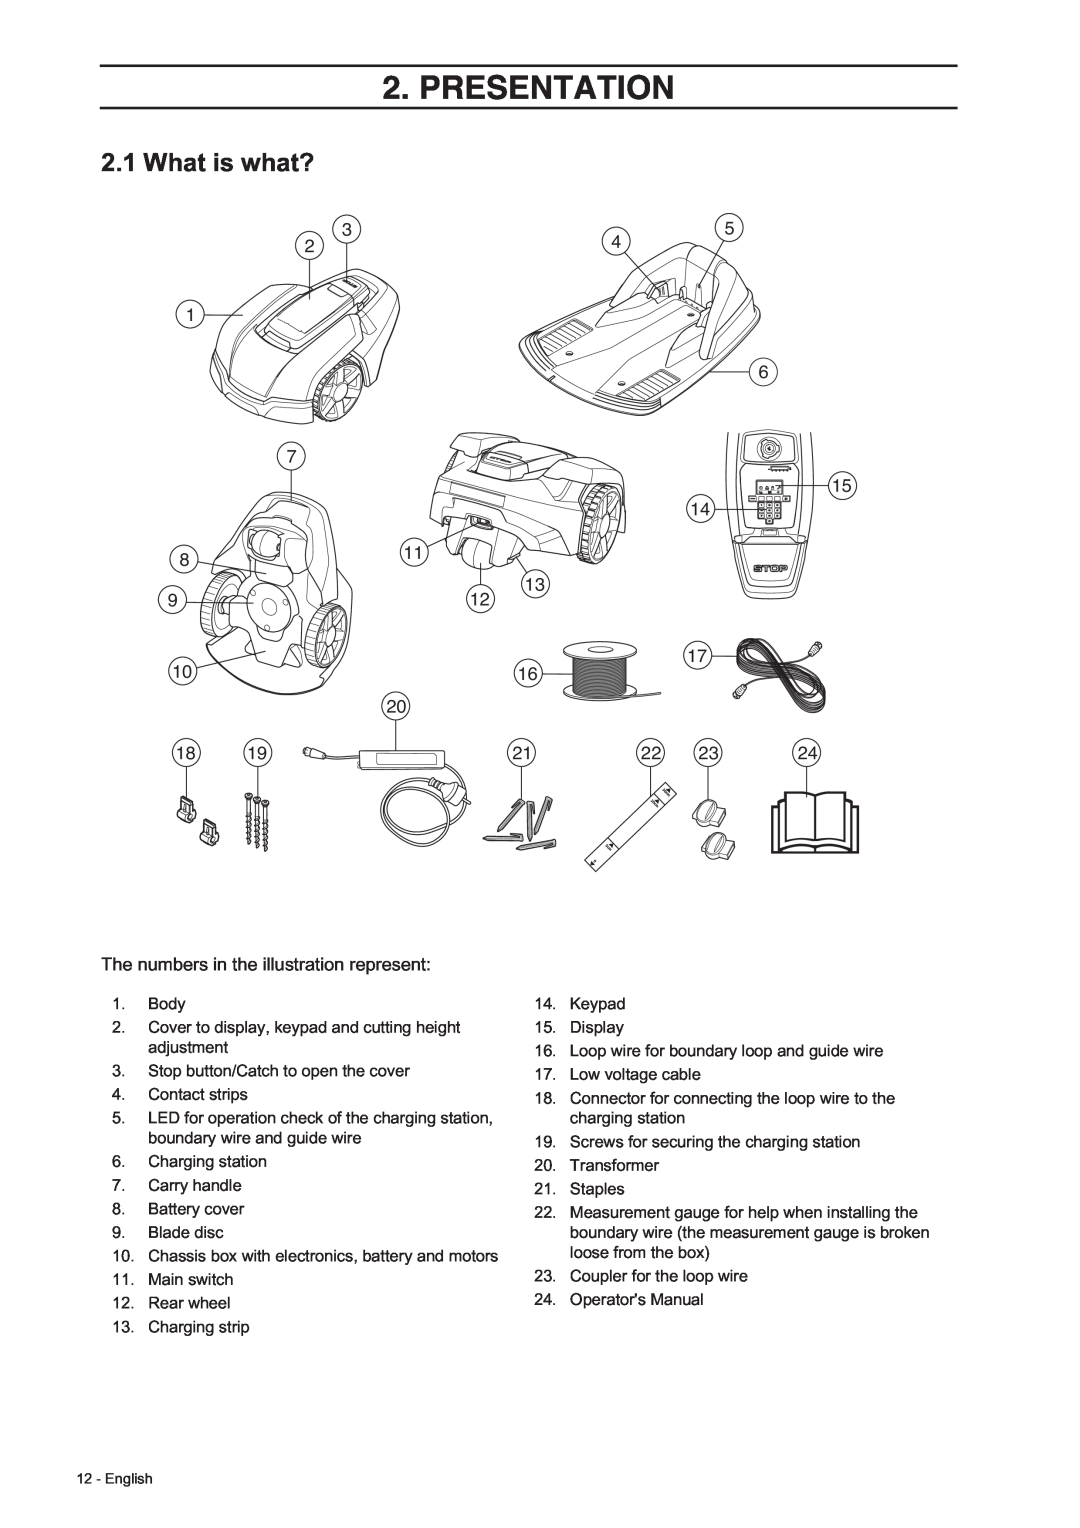 Husqvarna 308, 305 manual What is what?, Presentation, The numbers in the illustration represent 